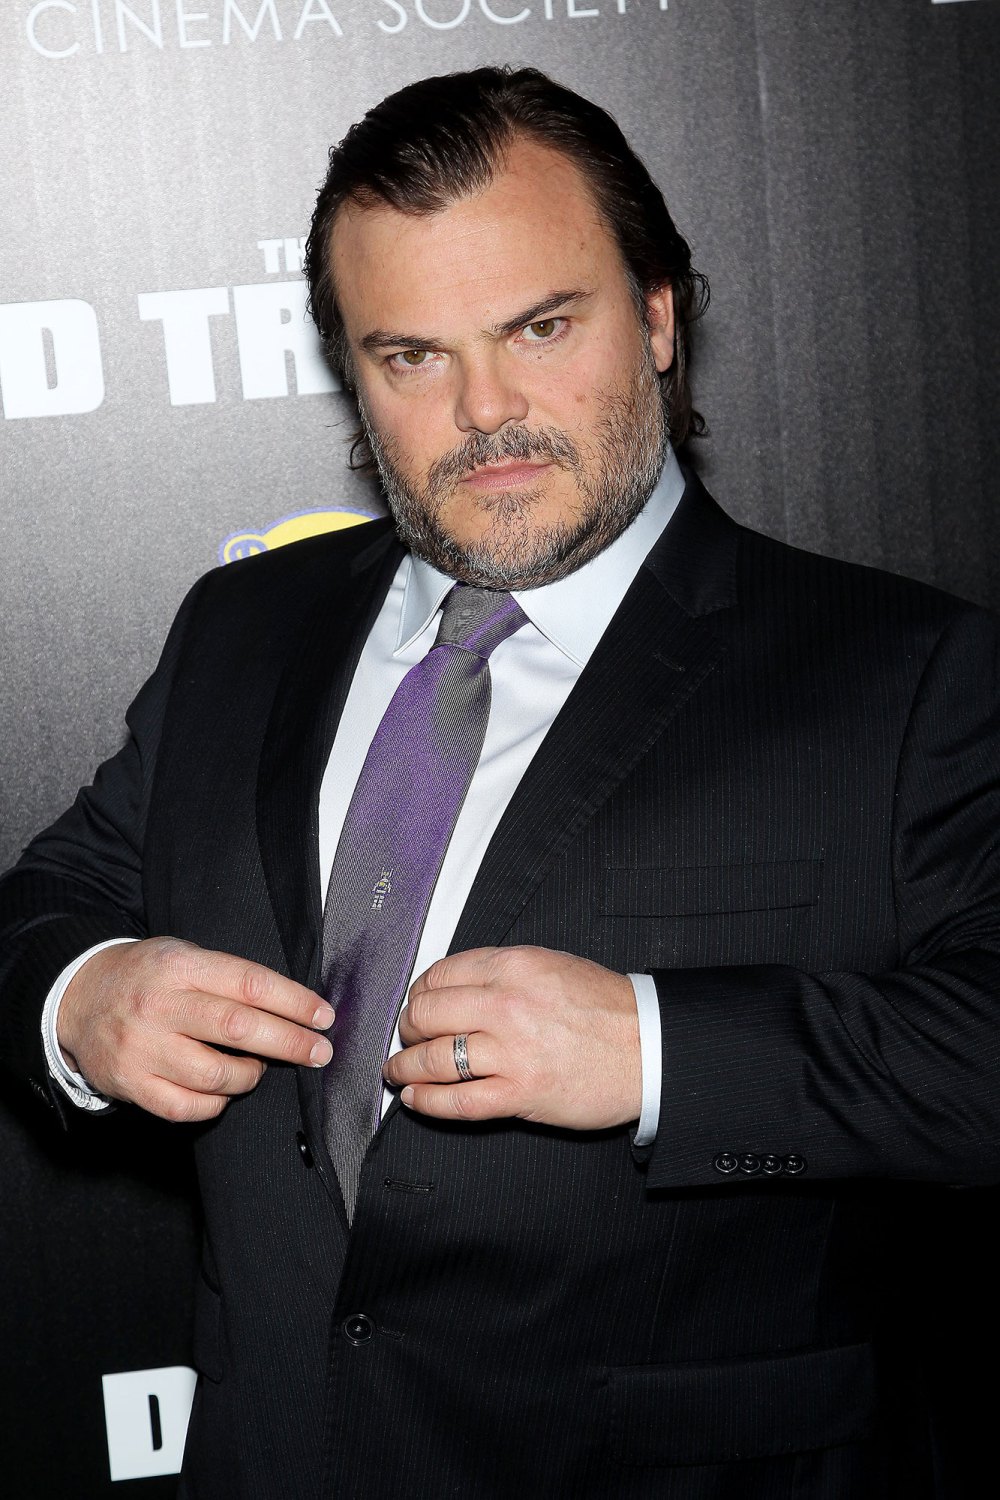 Jack Black's Sons Are Growing Up To Look Just Like Him